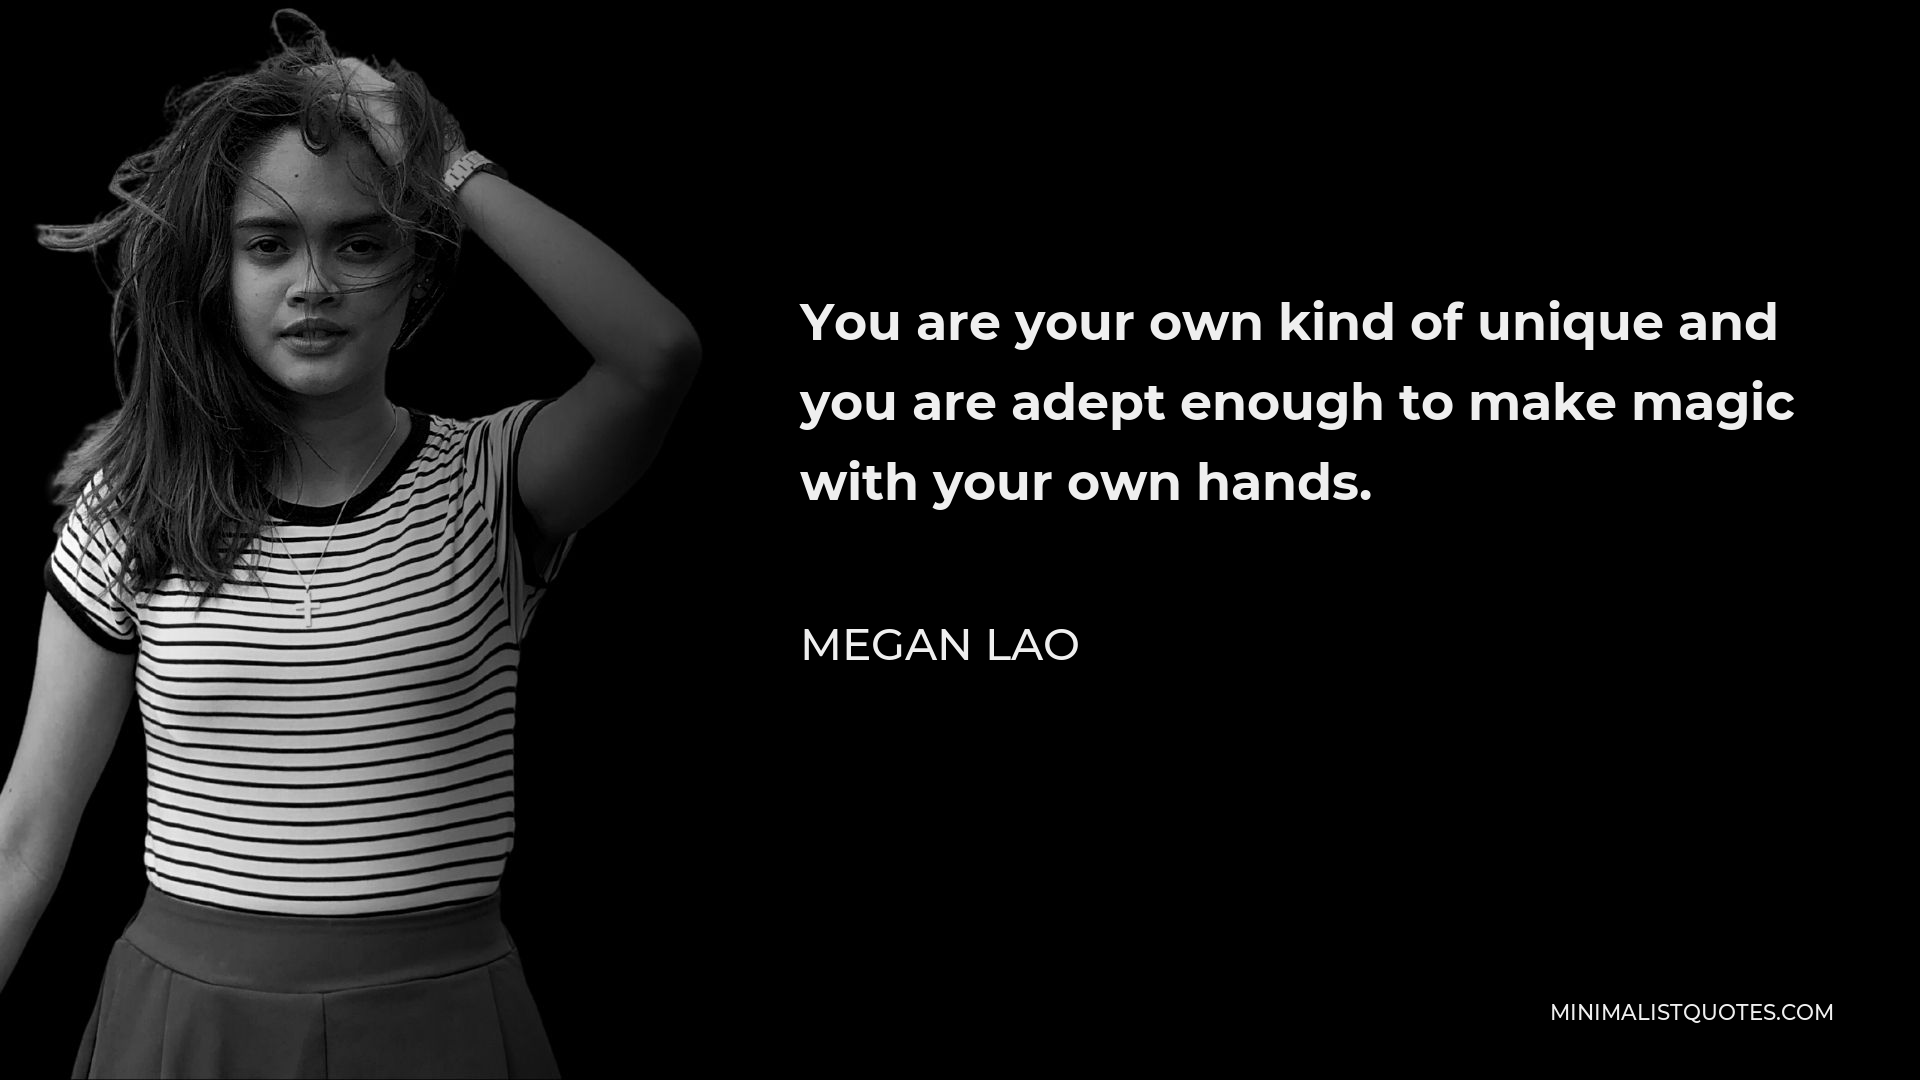 Megan Lao Quote - You are your own kind of unique and you are adept enough to make magic with your own hands.